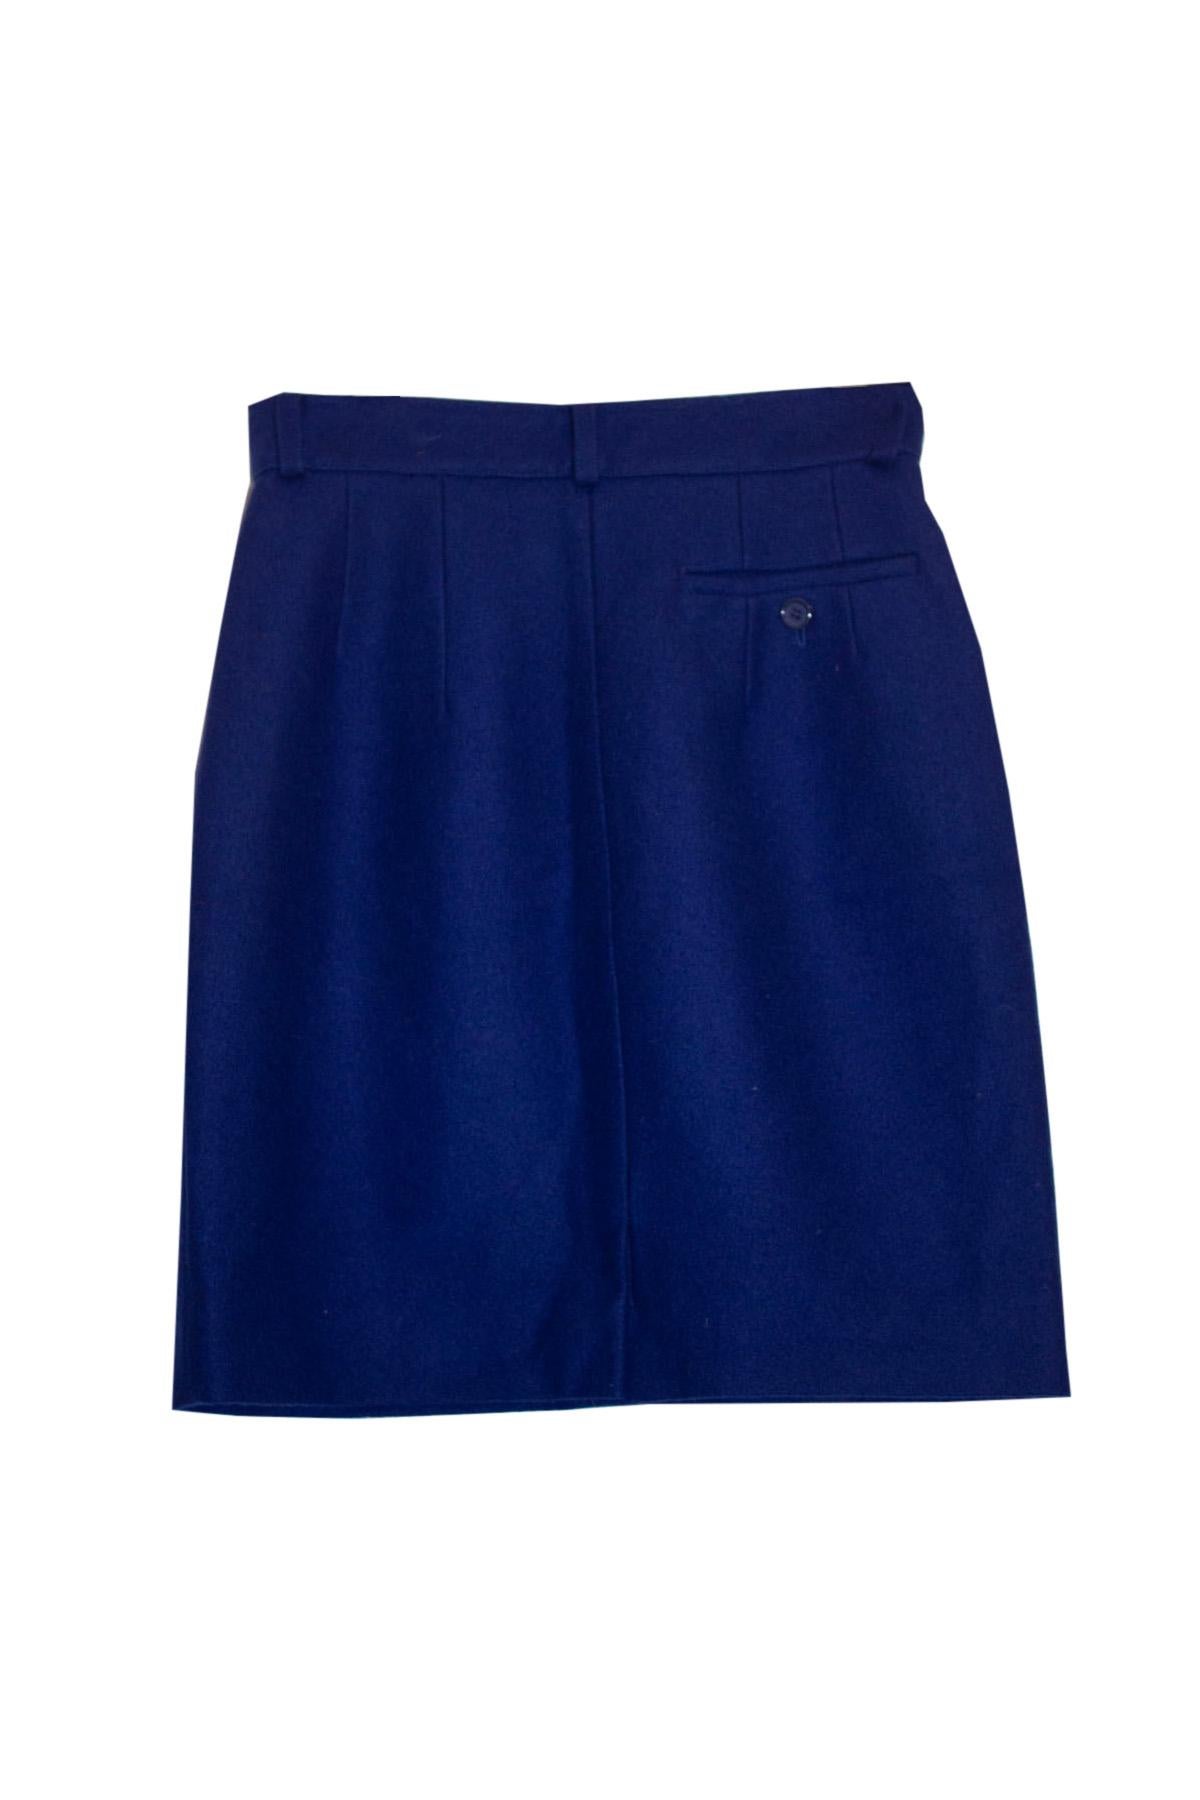 Vintage Kenzo Blue Wool Mini Skirt In Good Condition For Sale In London, GB